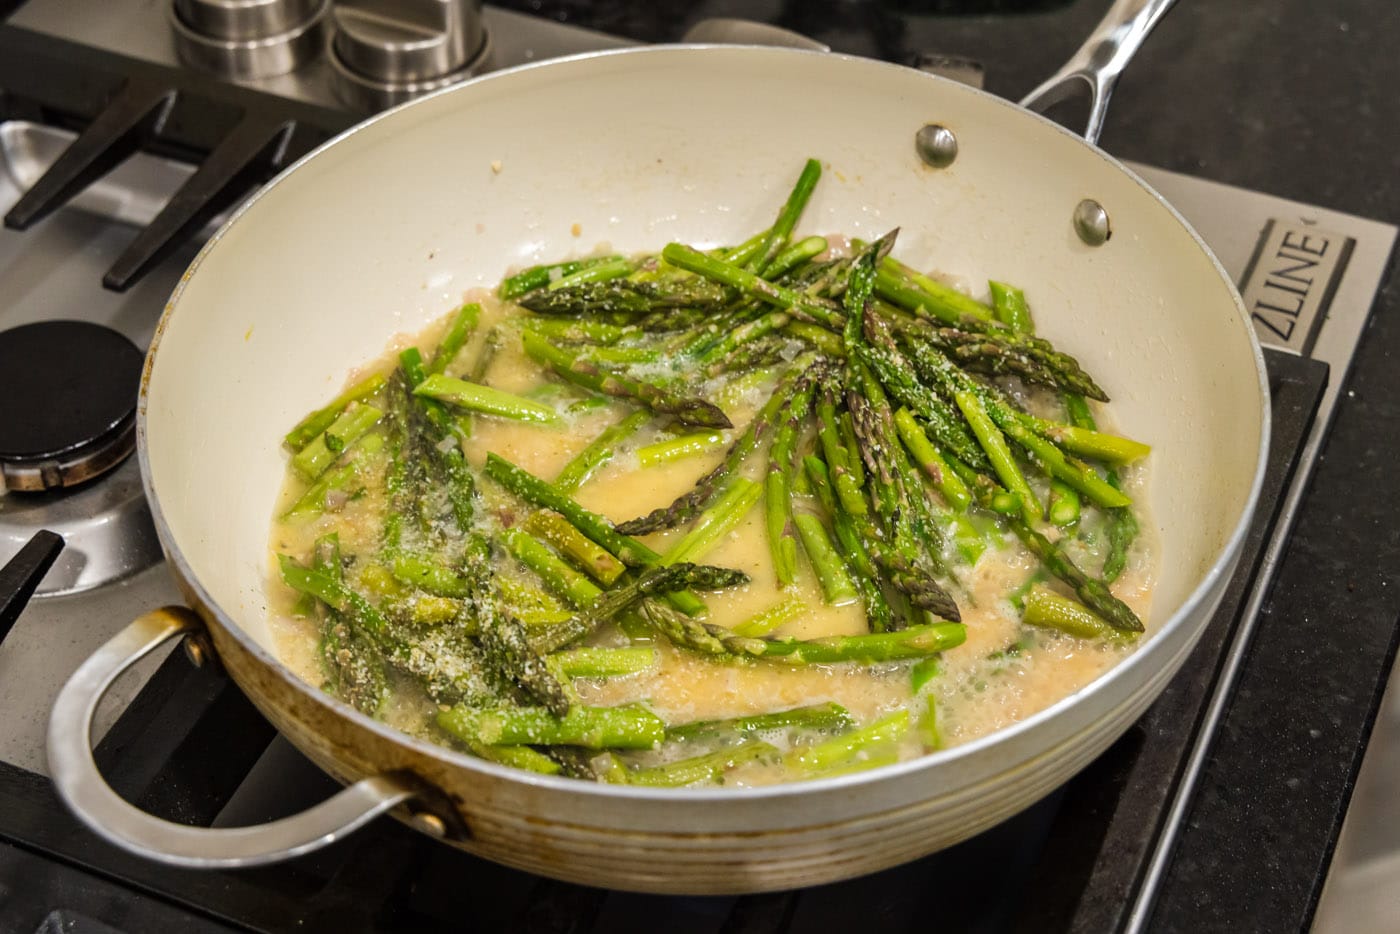 asparagus added to melted butter mixture in skillet